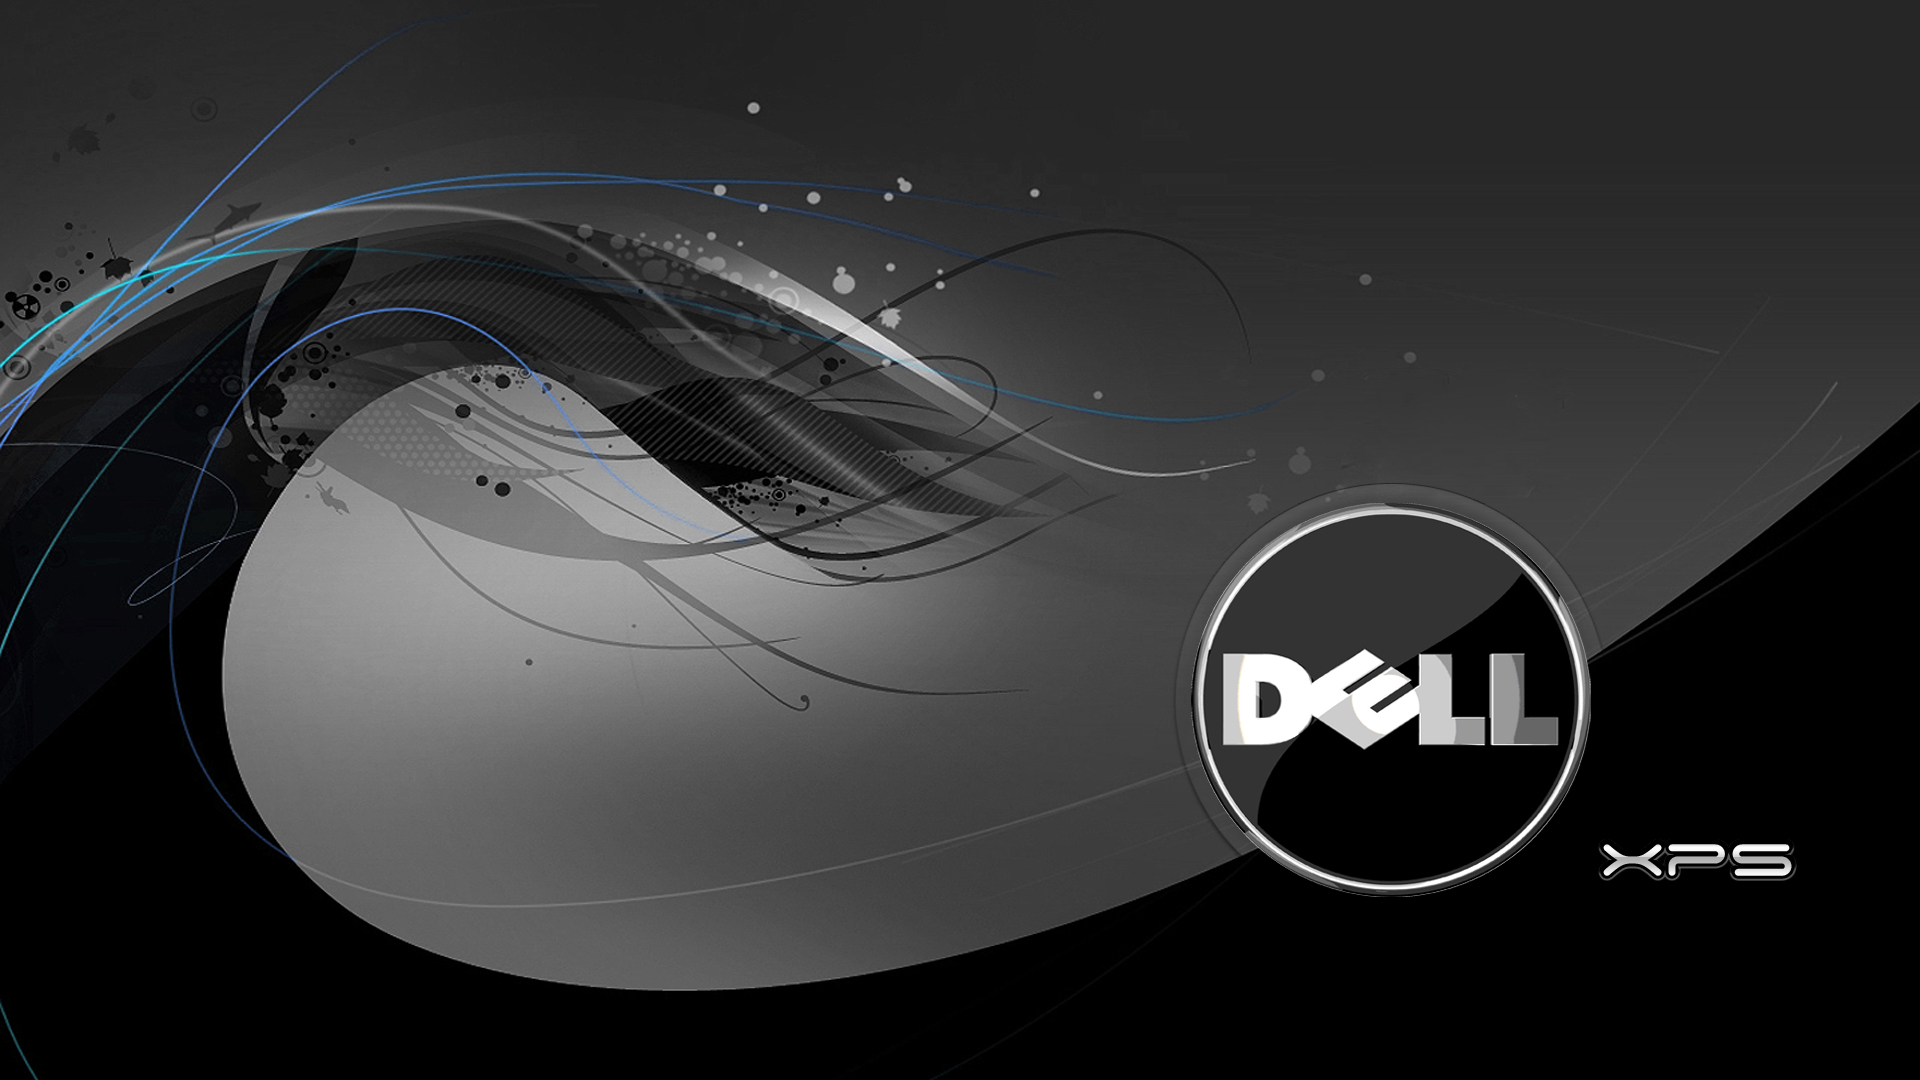 You Can Checkout Other Dell Xps Wallpaper Here